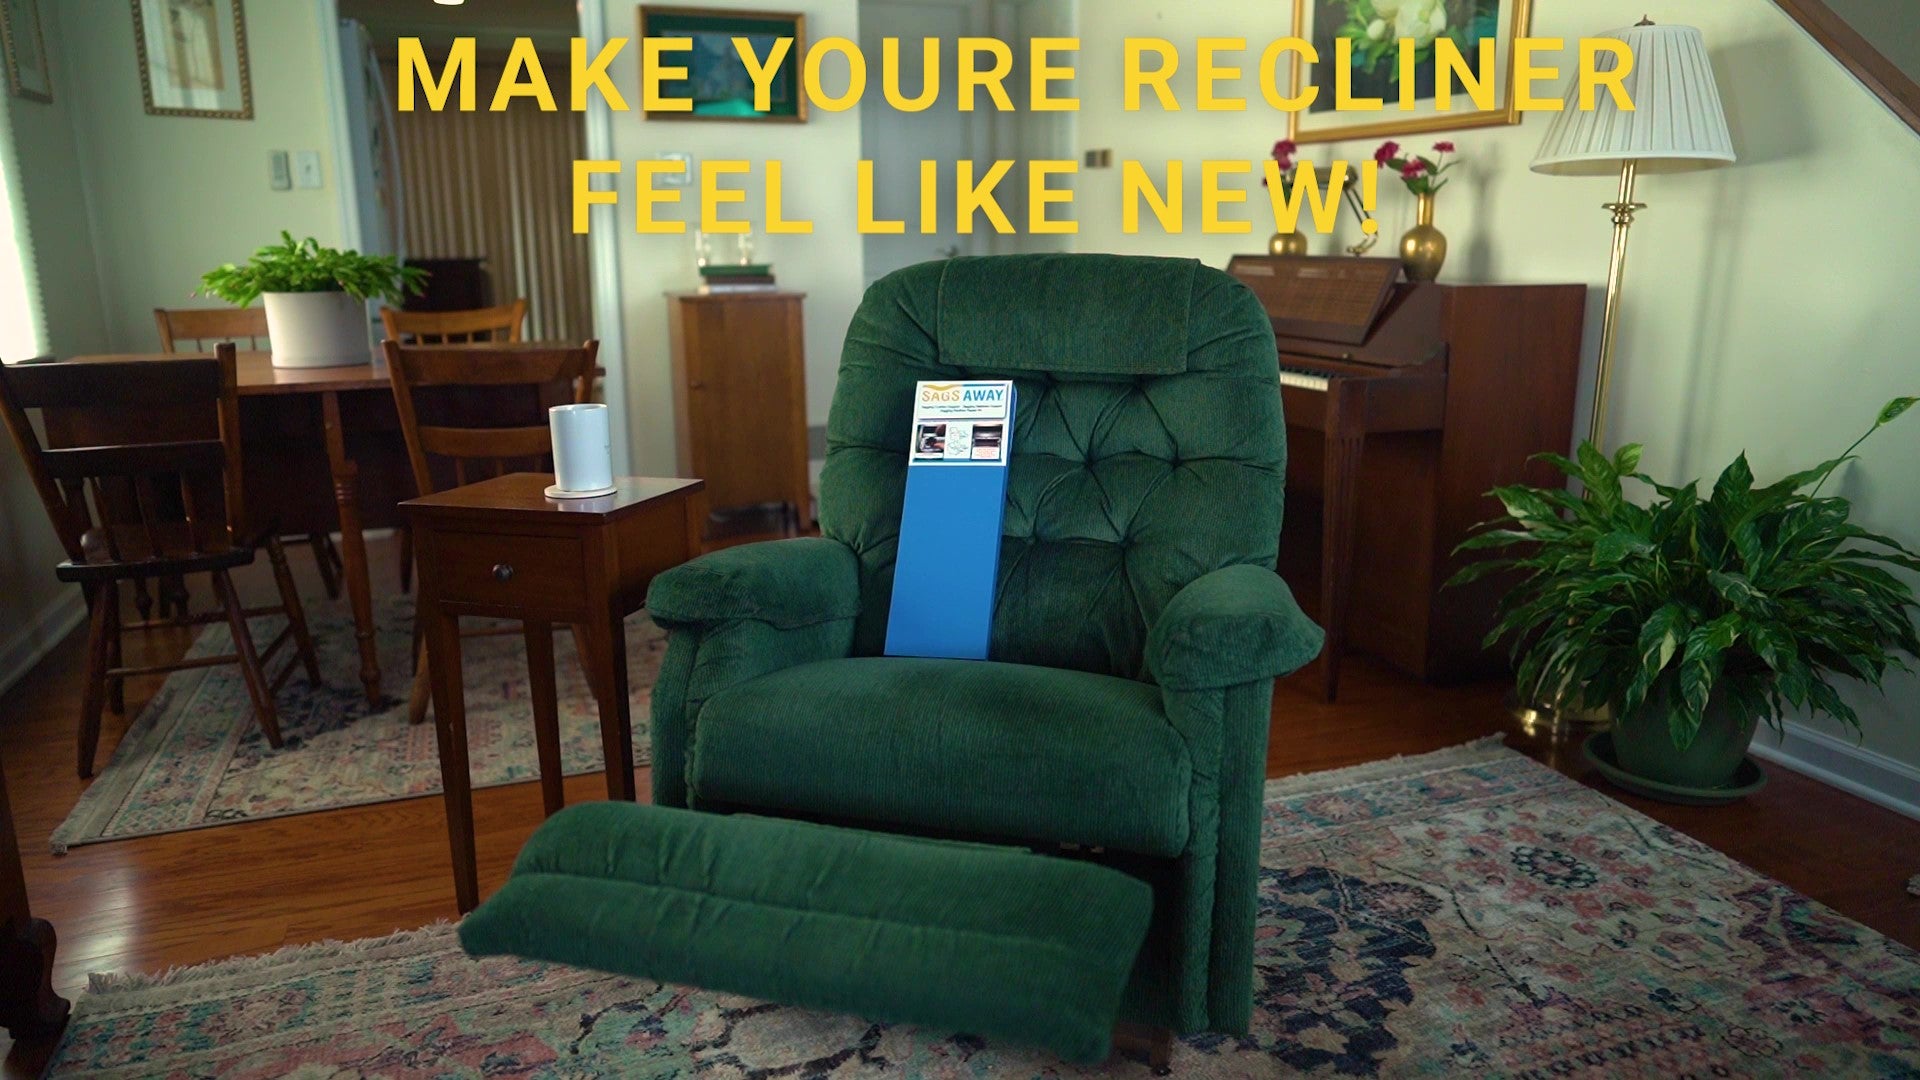 A recliner with a SagsAway repair kit in the seat. Overlay text says "make your recliner feel like new!"